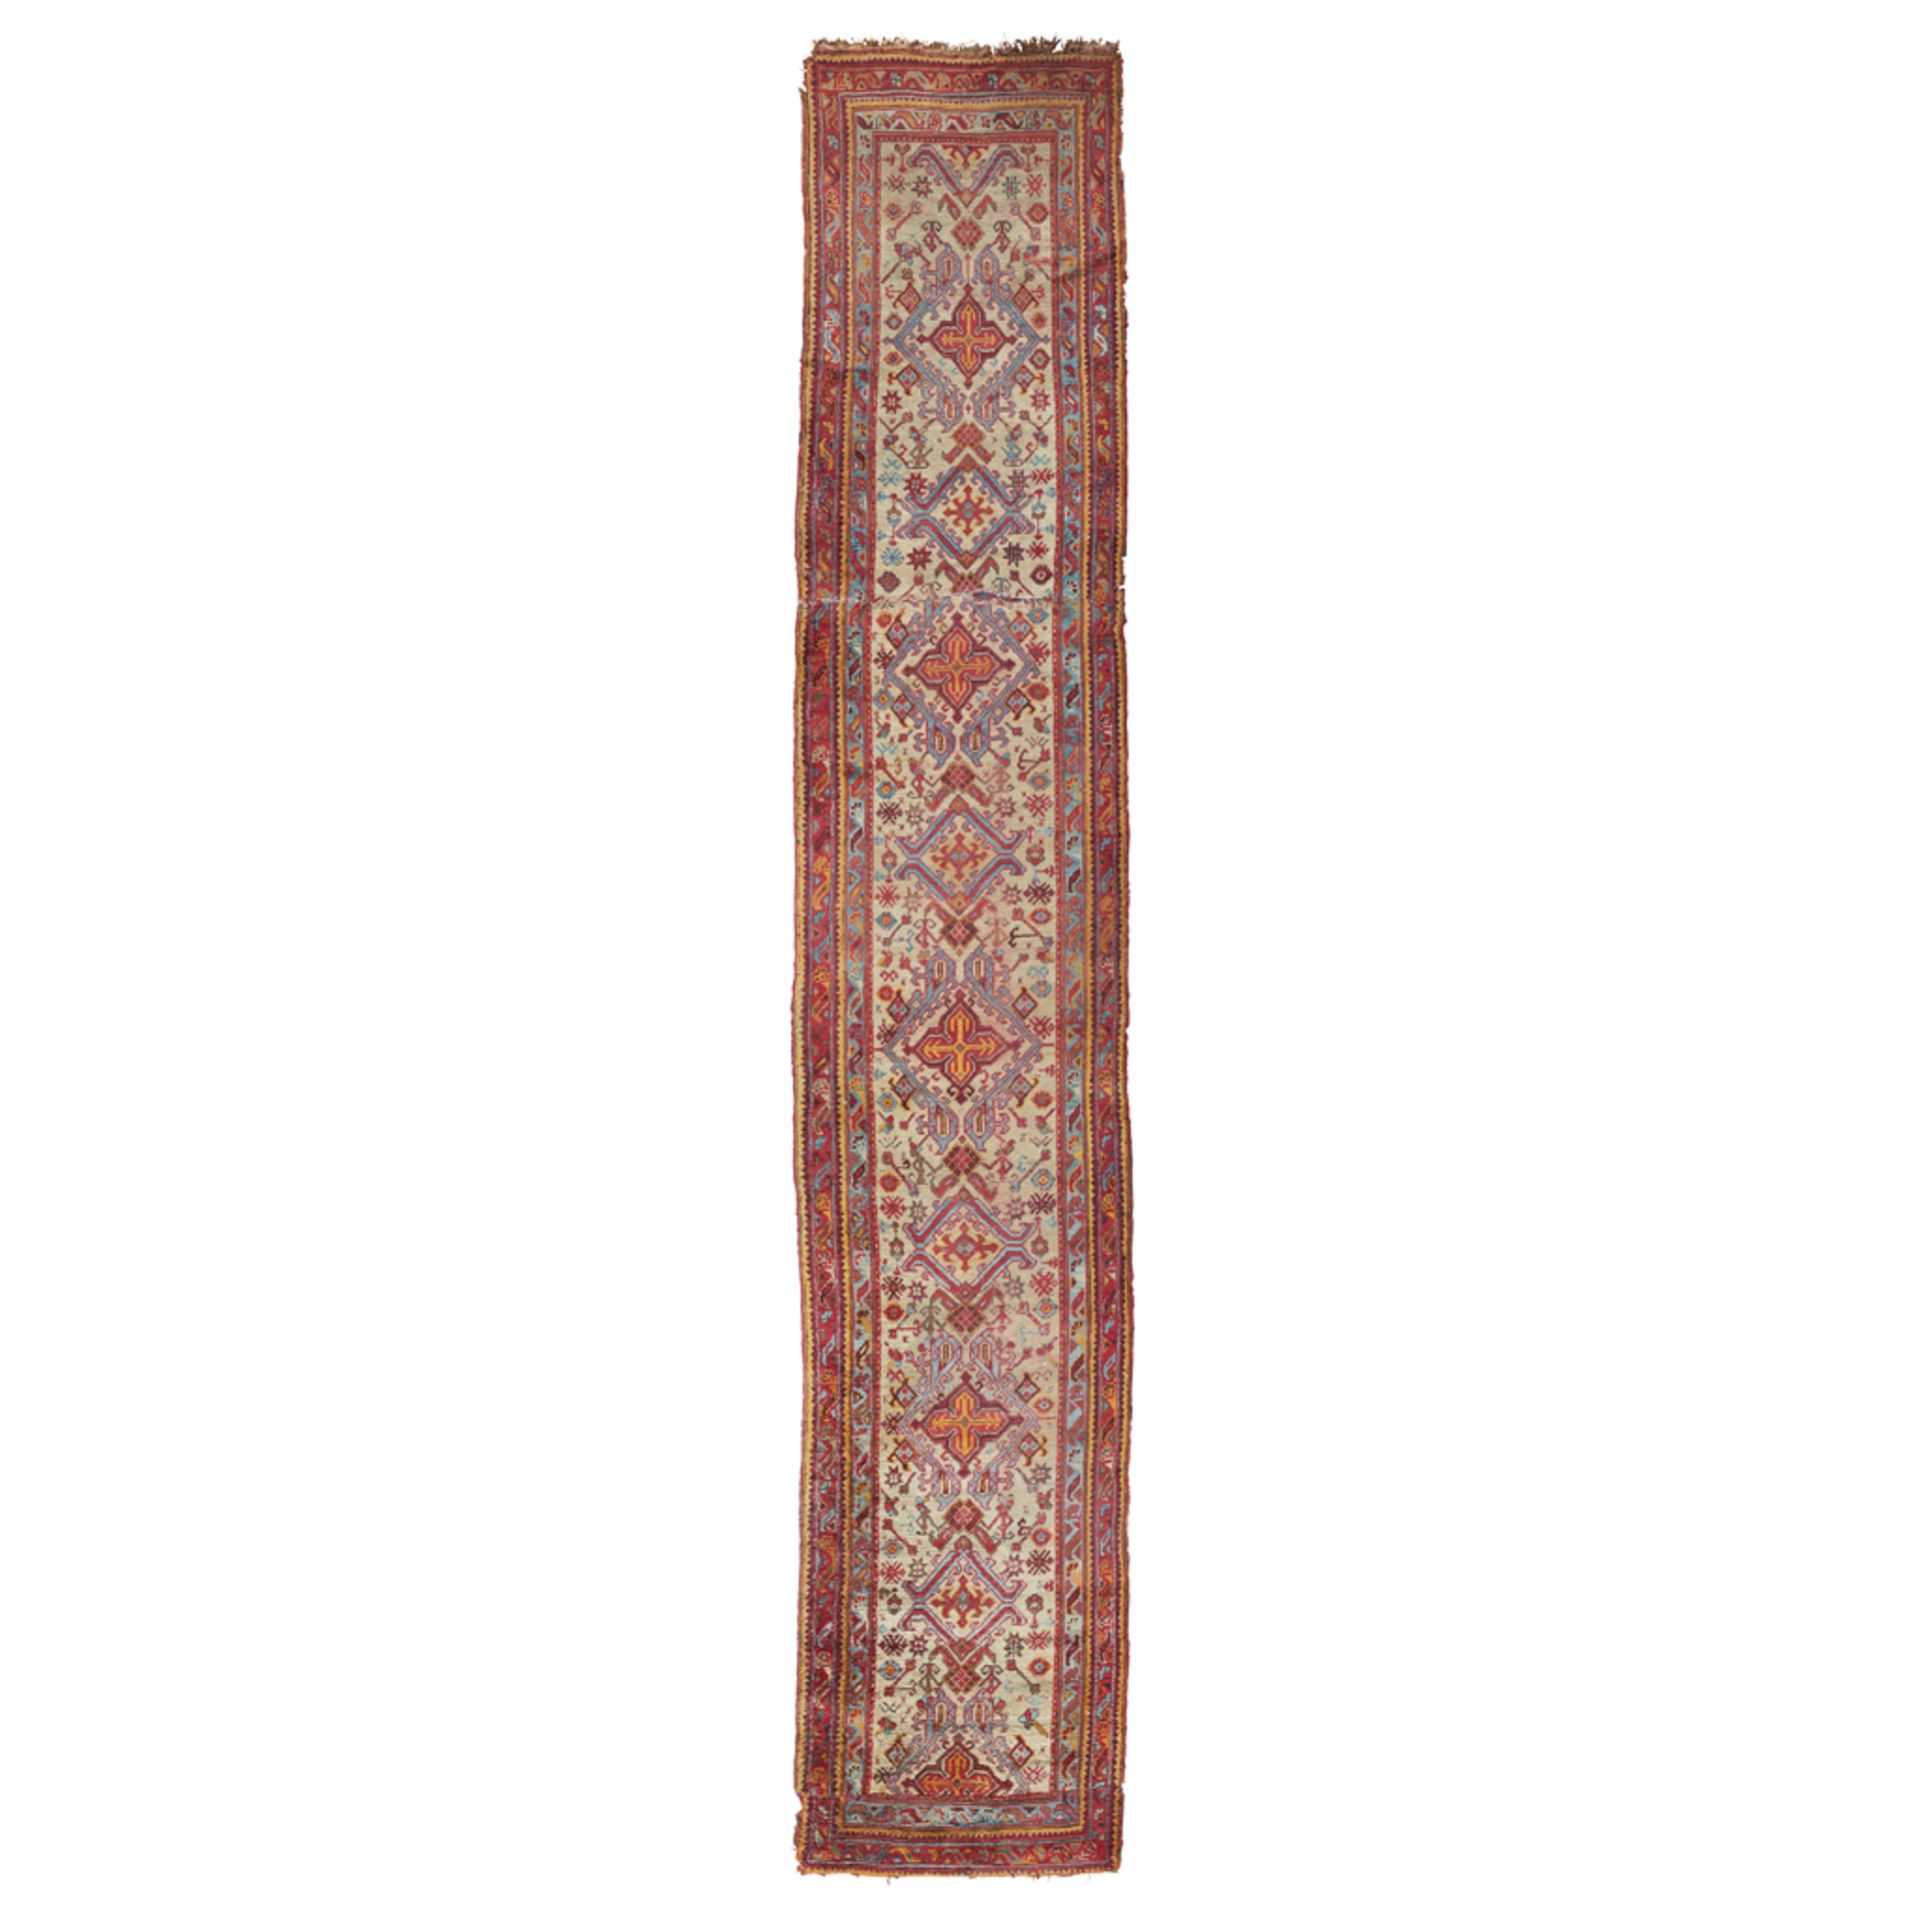 USHAK RUNNER WEST ANATOLIA, LATE 19TH/EARLY 20TH CENTURY the camel field with column of cruciform